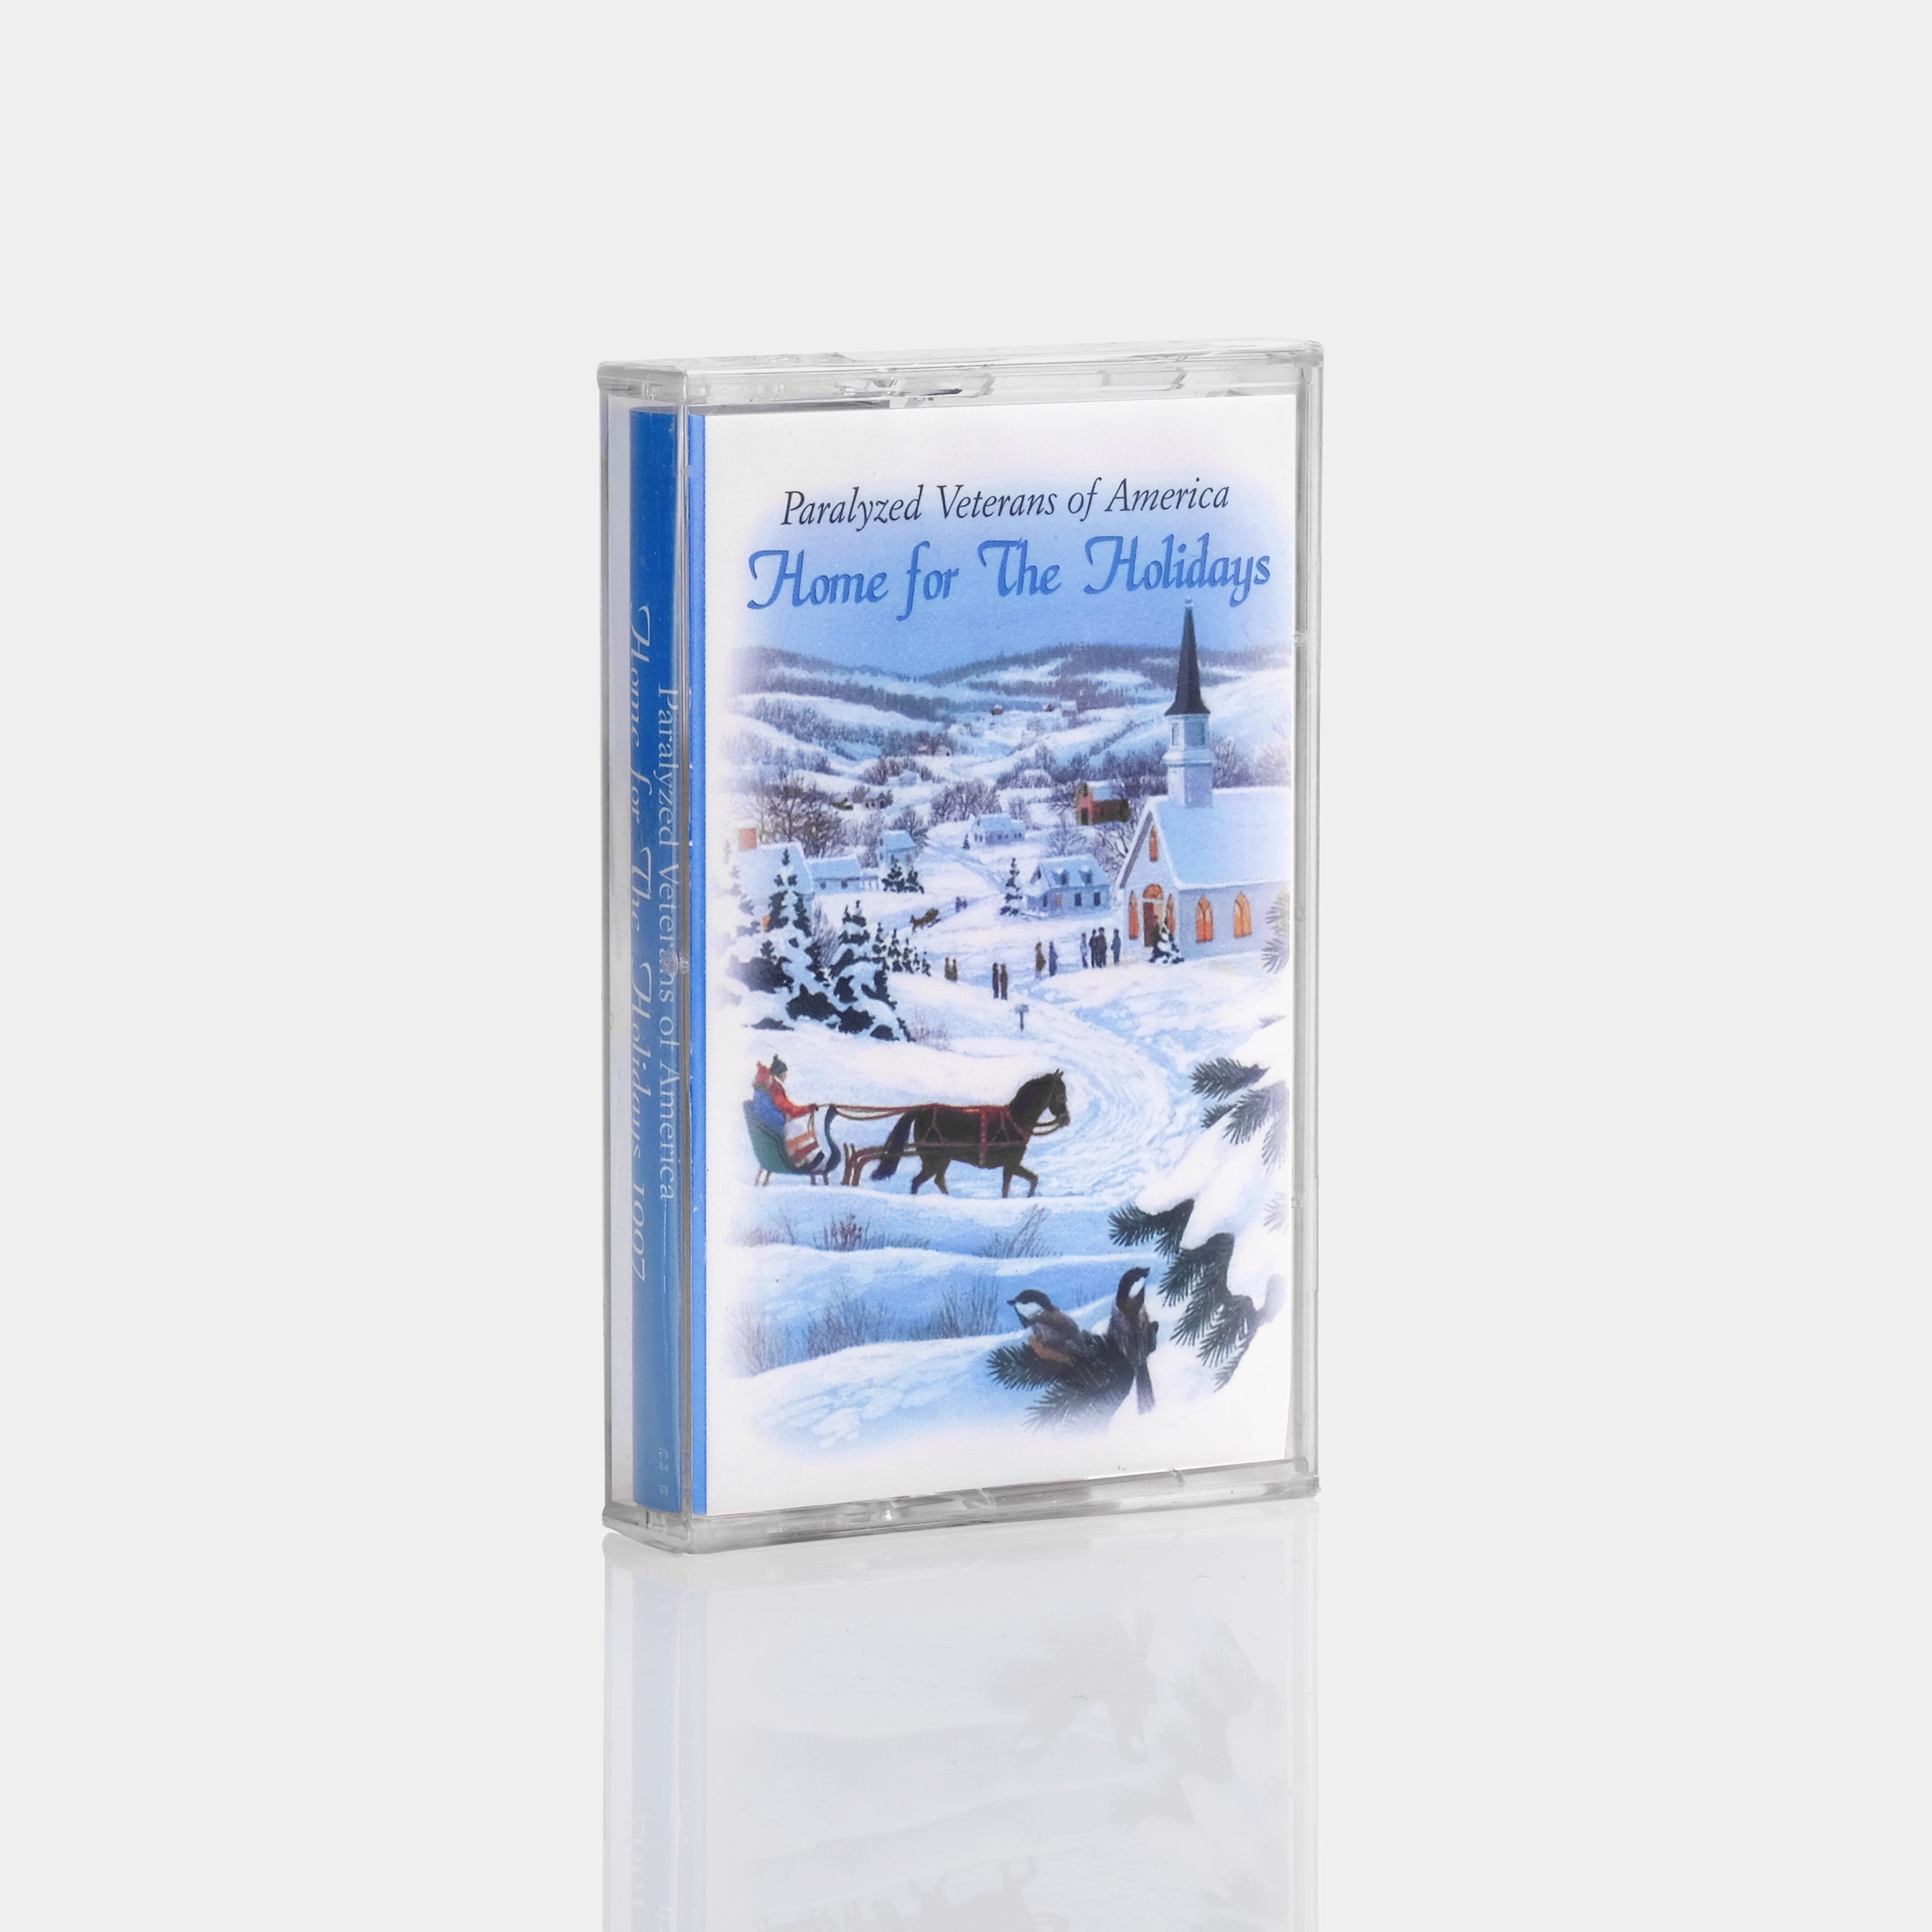 Paralyzed Veterans Of America: Home For The Holidays Cassette Tape